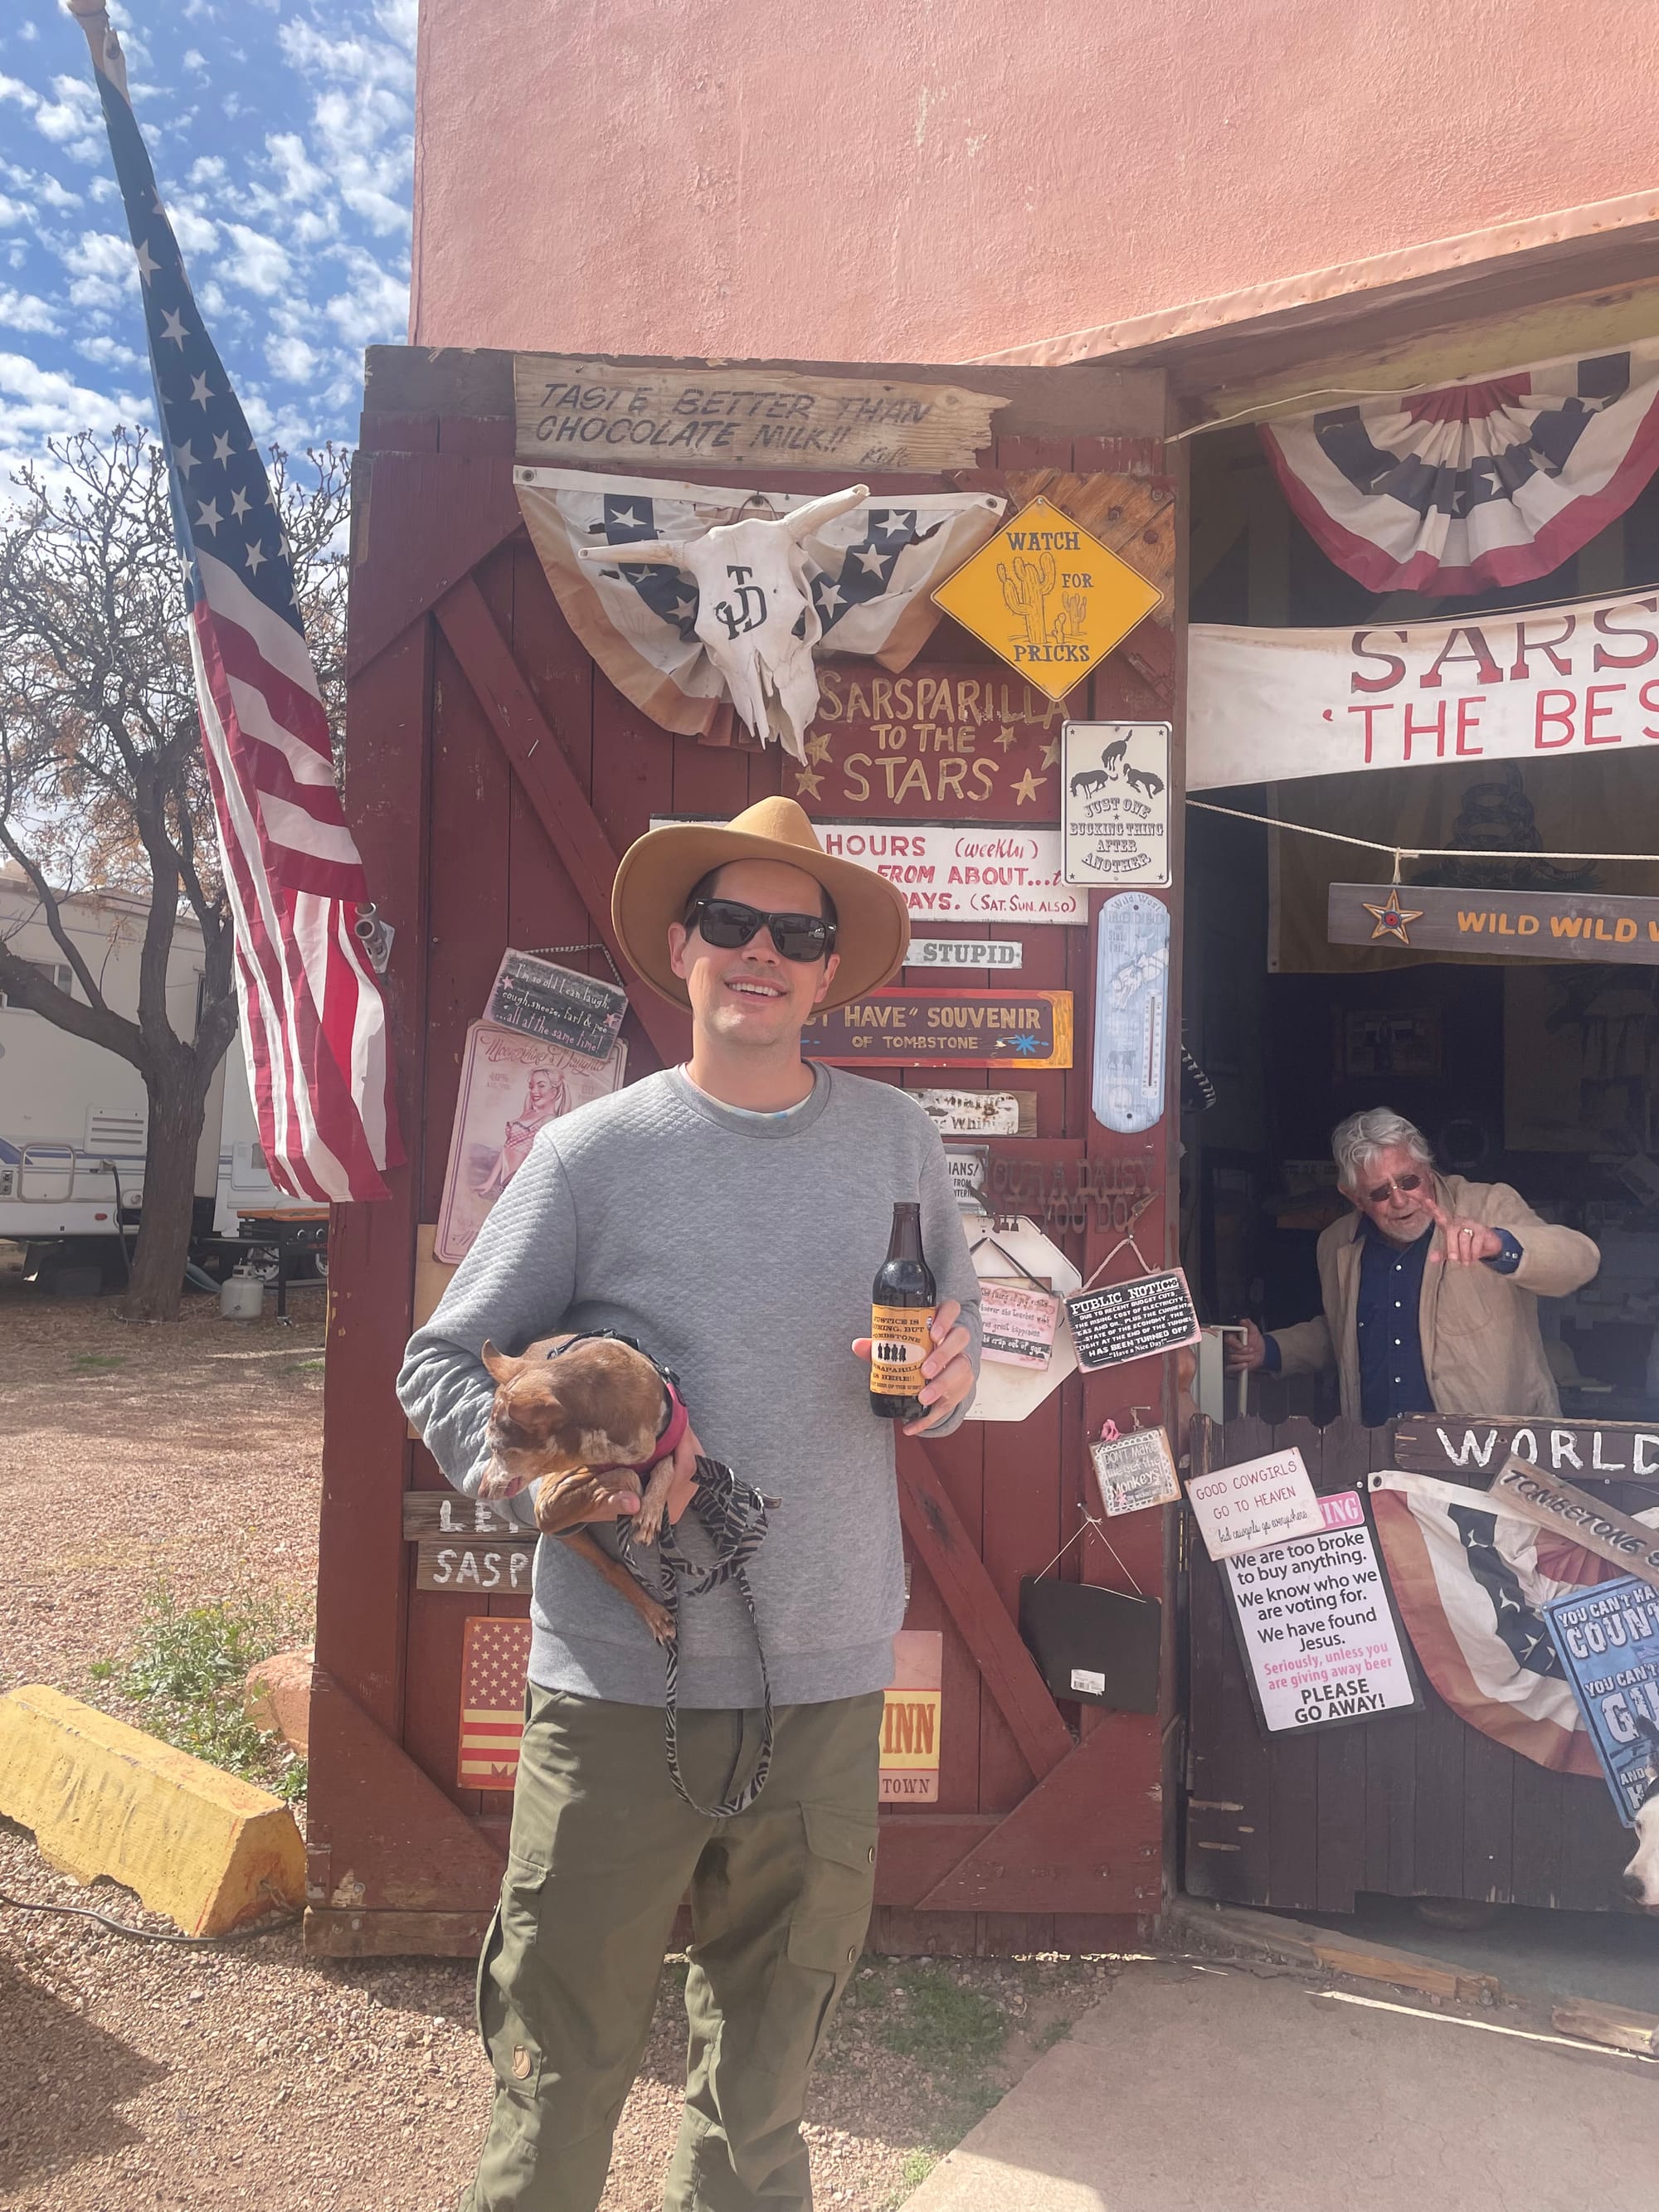 Touring Small Towns in Arizona